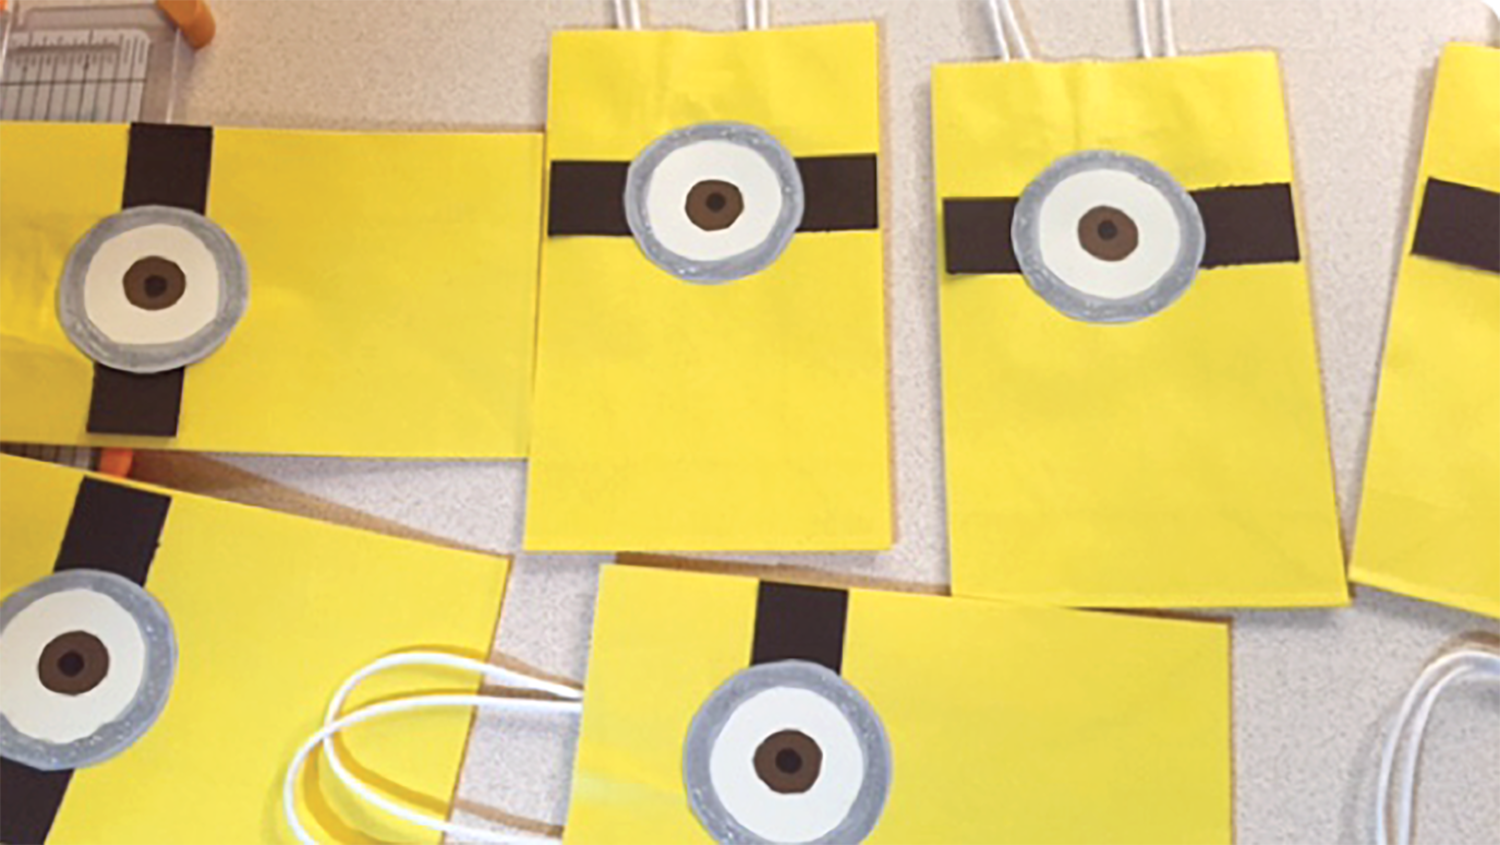 DIY Minion Gift Bags in 5 easy steps